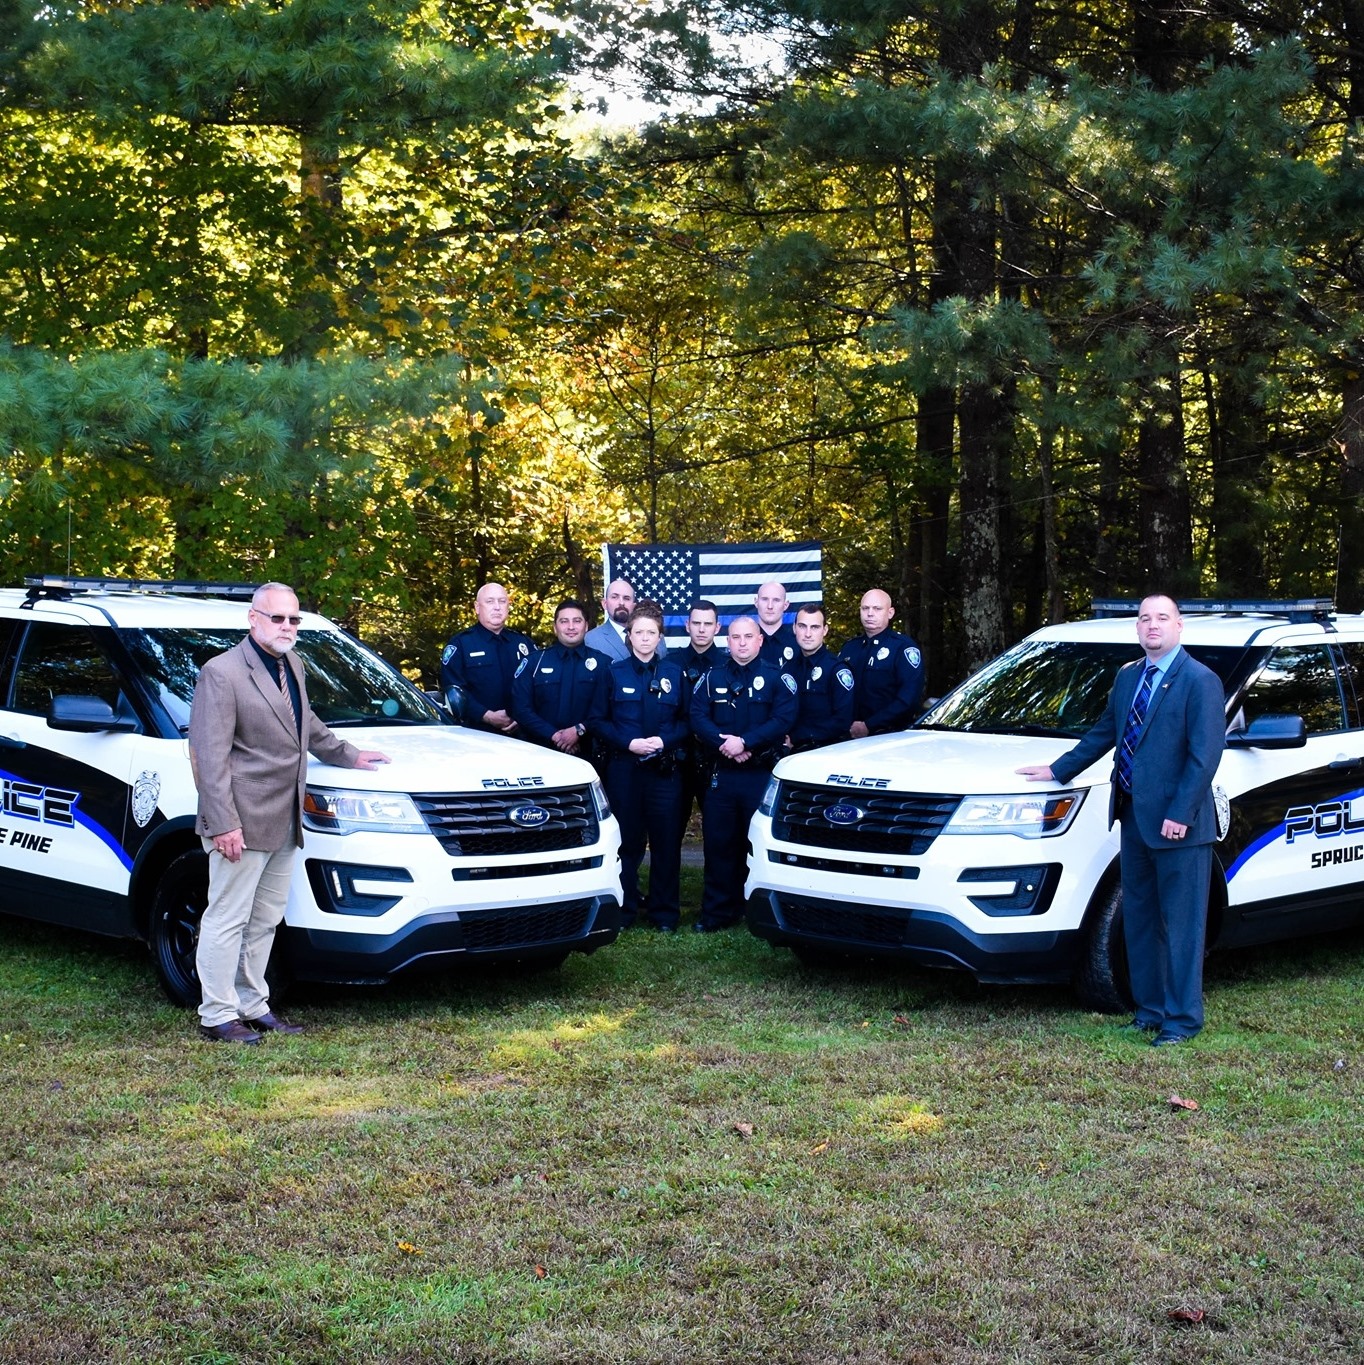 Members of the Spruce Pine Police Department pose for a photo. The department is getting some significant upgrades to incentivize employees to stay with the department. (Photo sourced from SPPD Facebook)